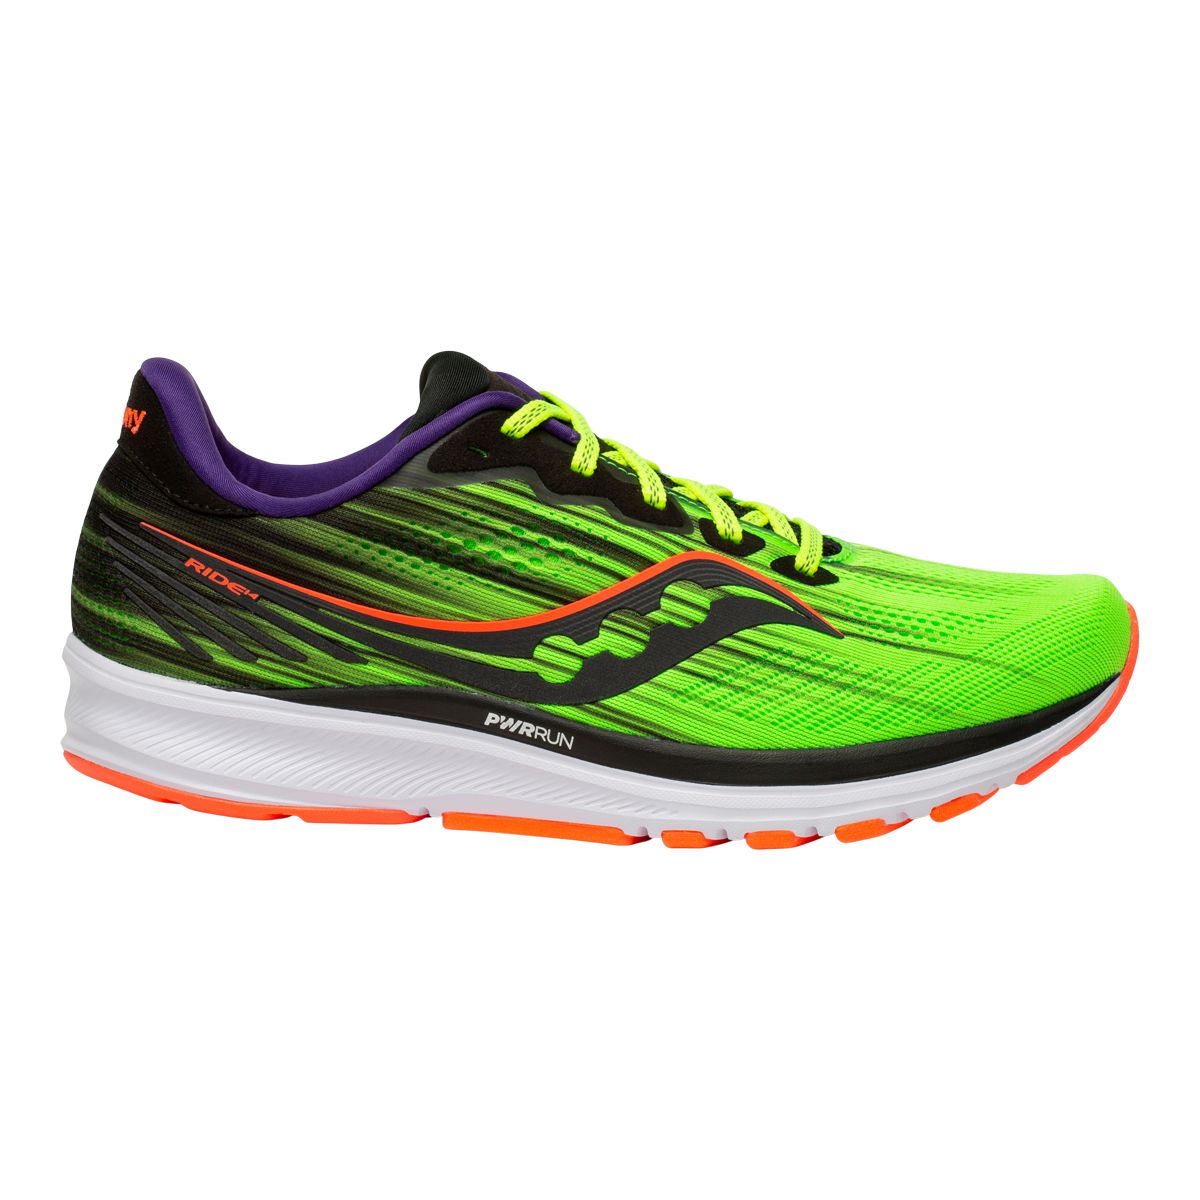 Saucony Men's PWRRUN Ride 14 Running Shoes, Breathable, Slip On